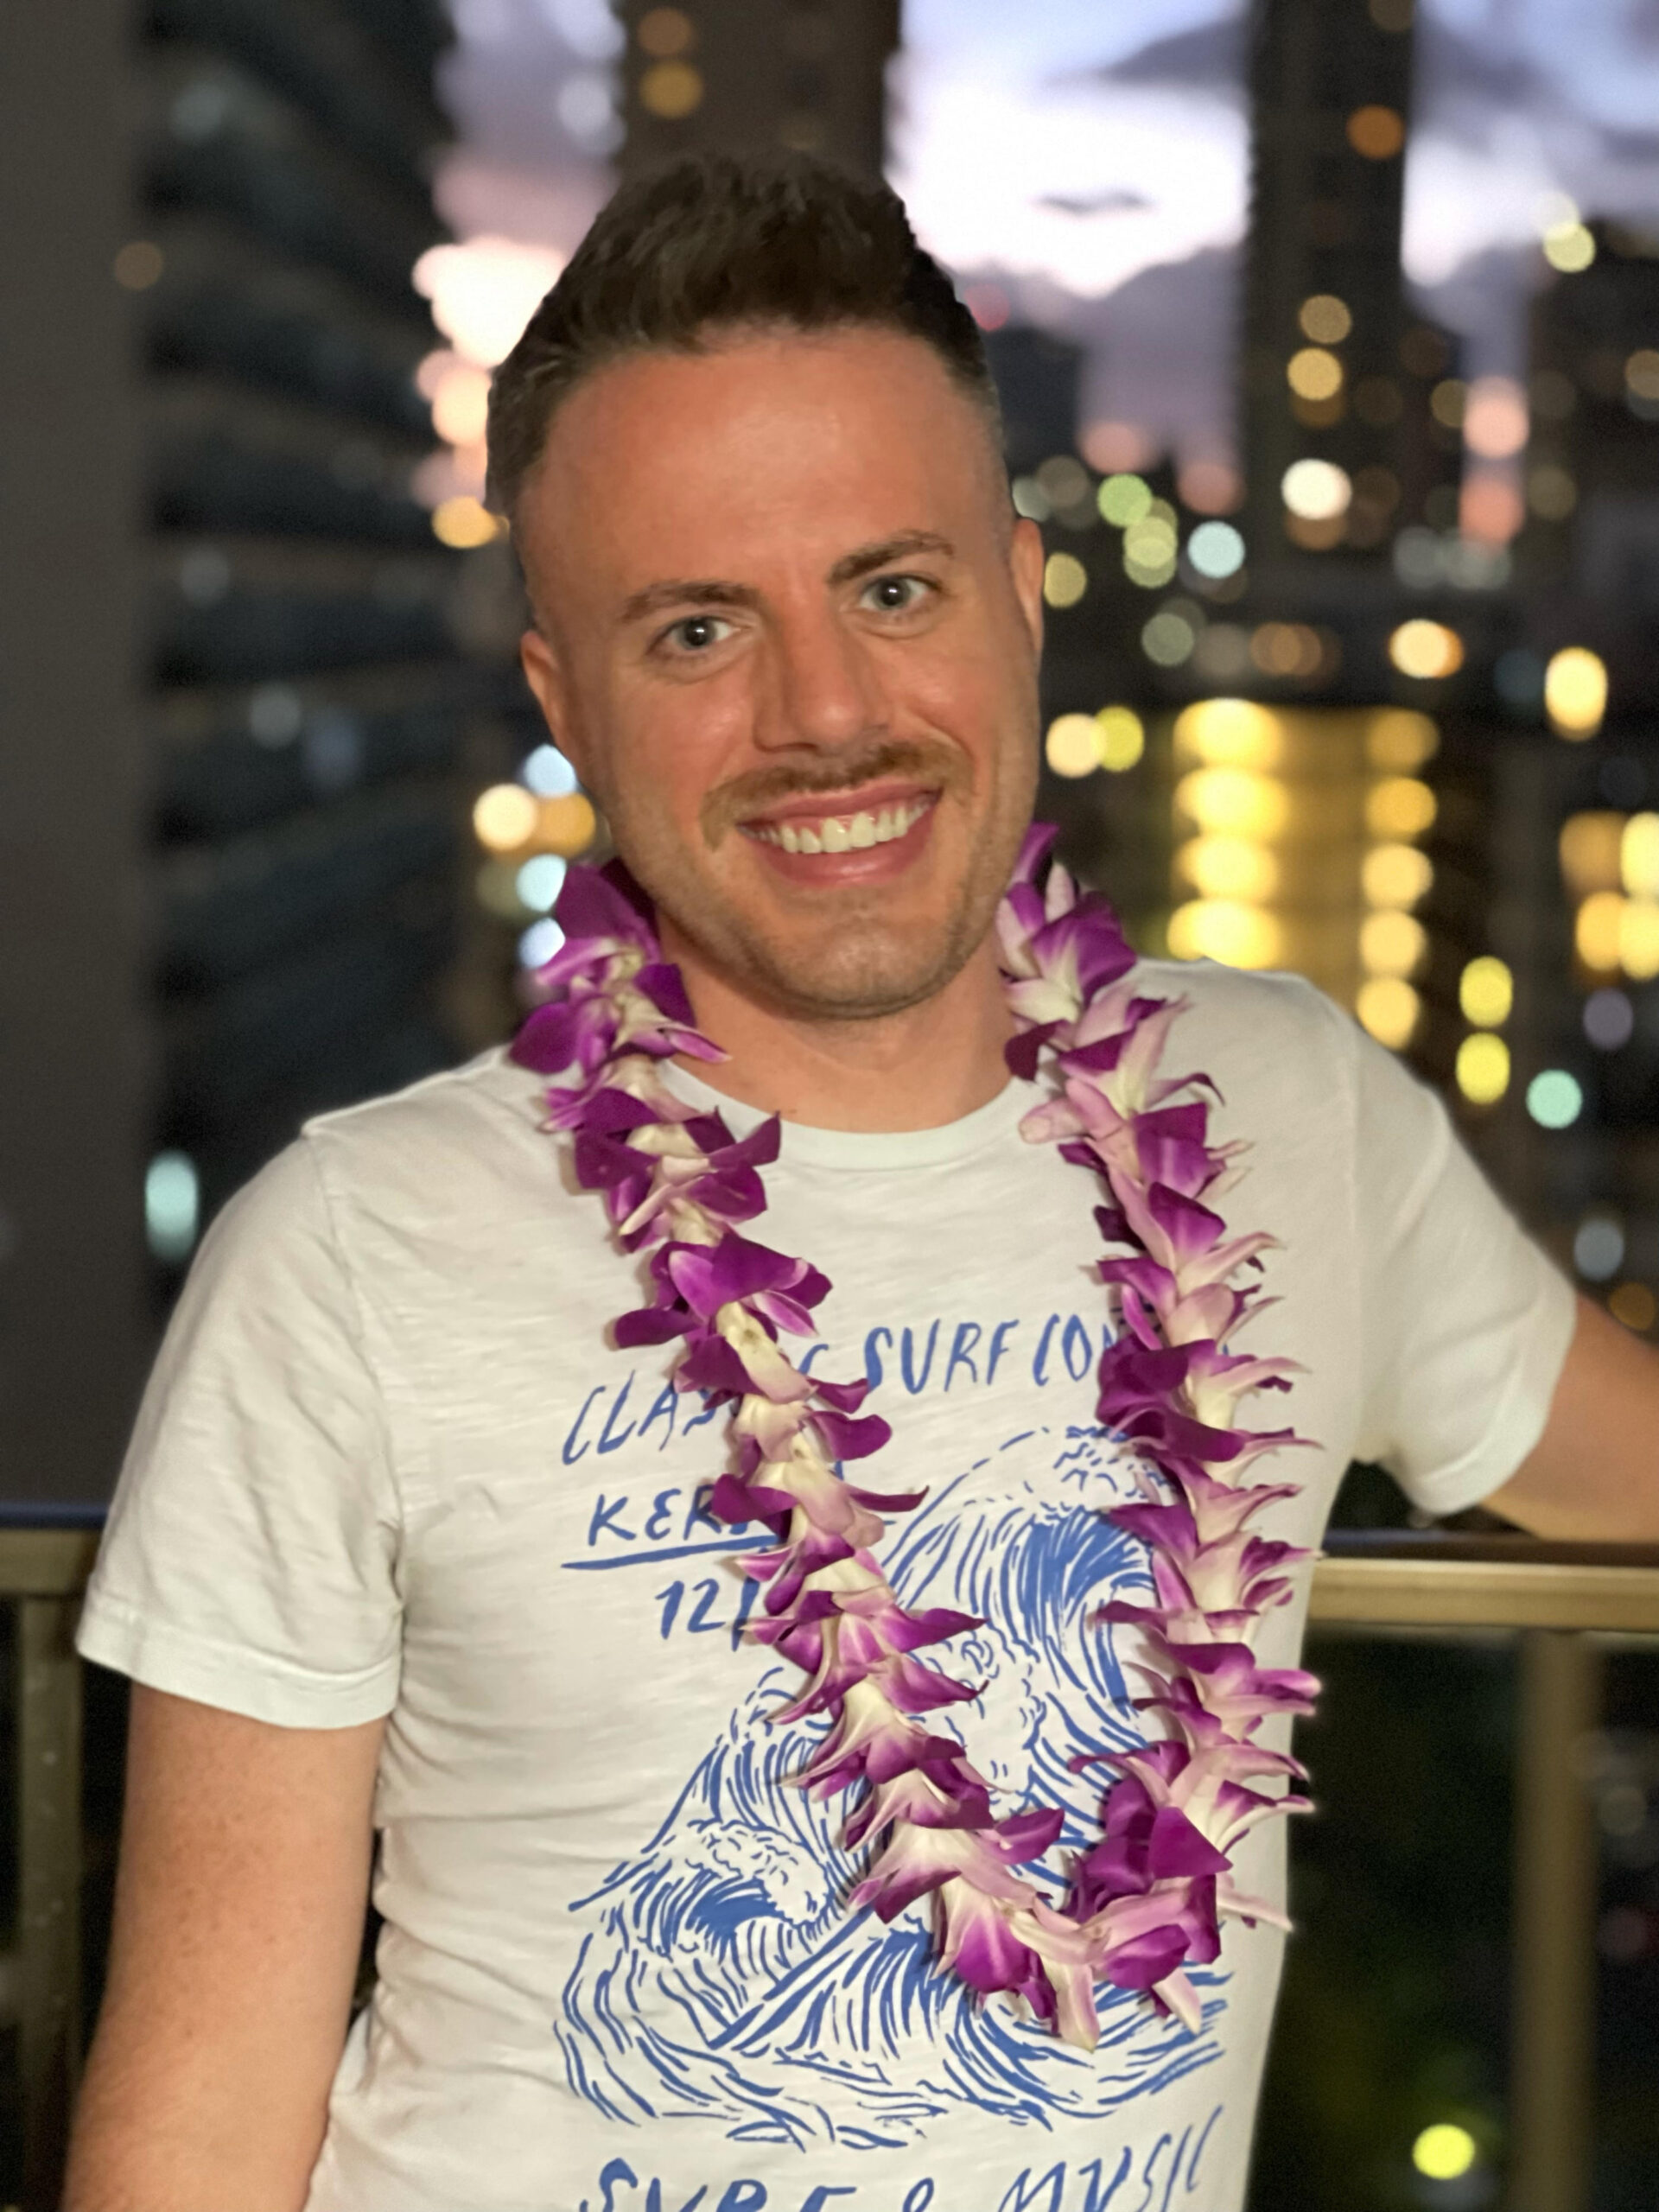 A picture of Jordan the night he arrived to visit Paul in Hawaii. Paul greeted him with a fresh lei.